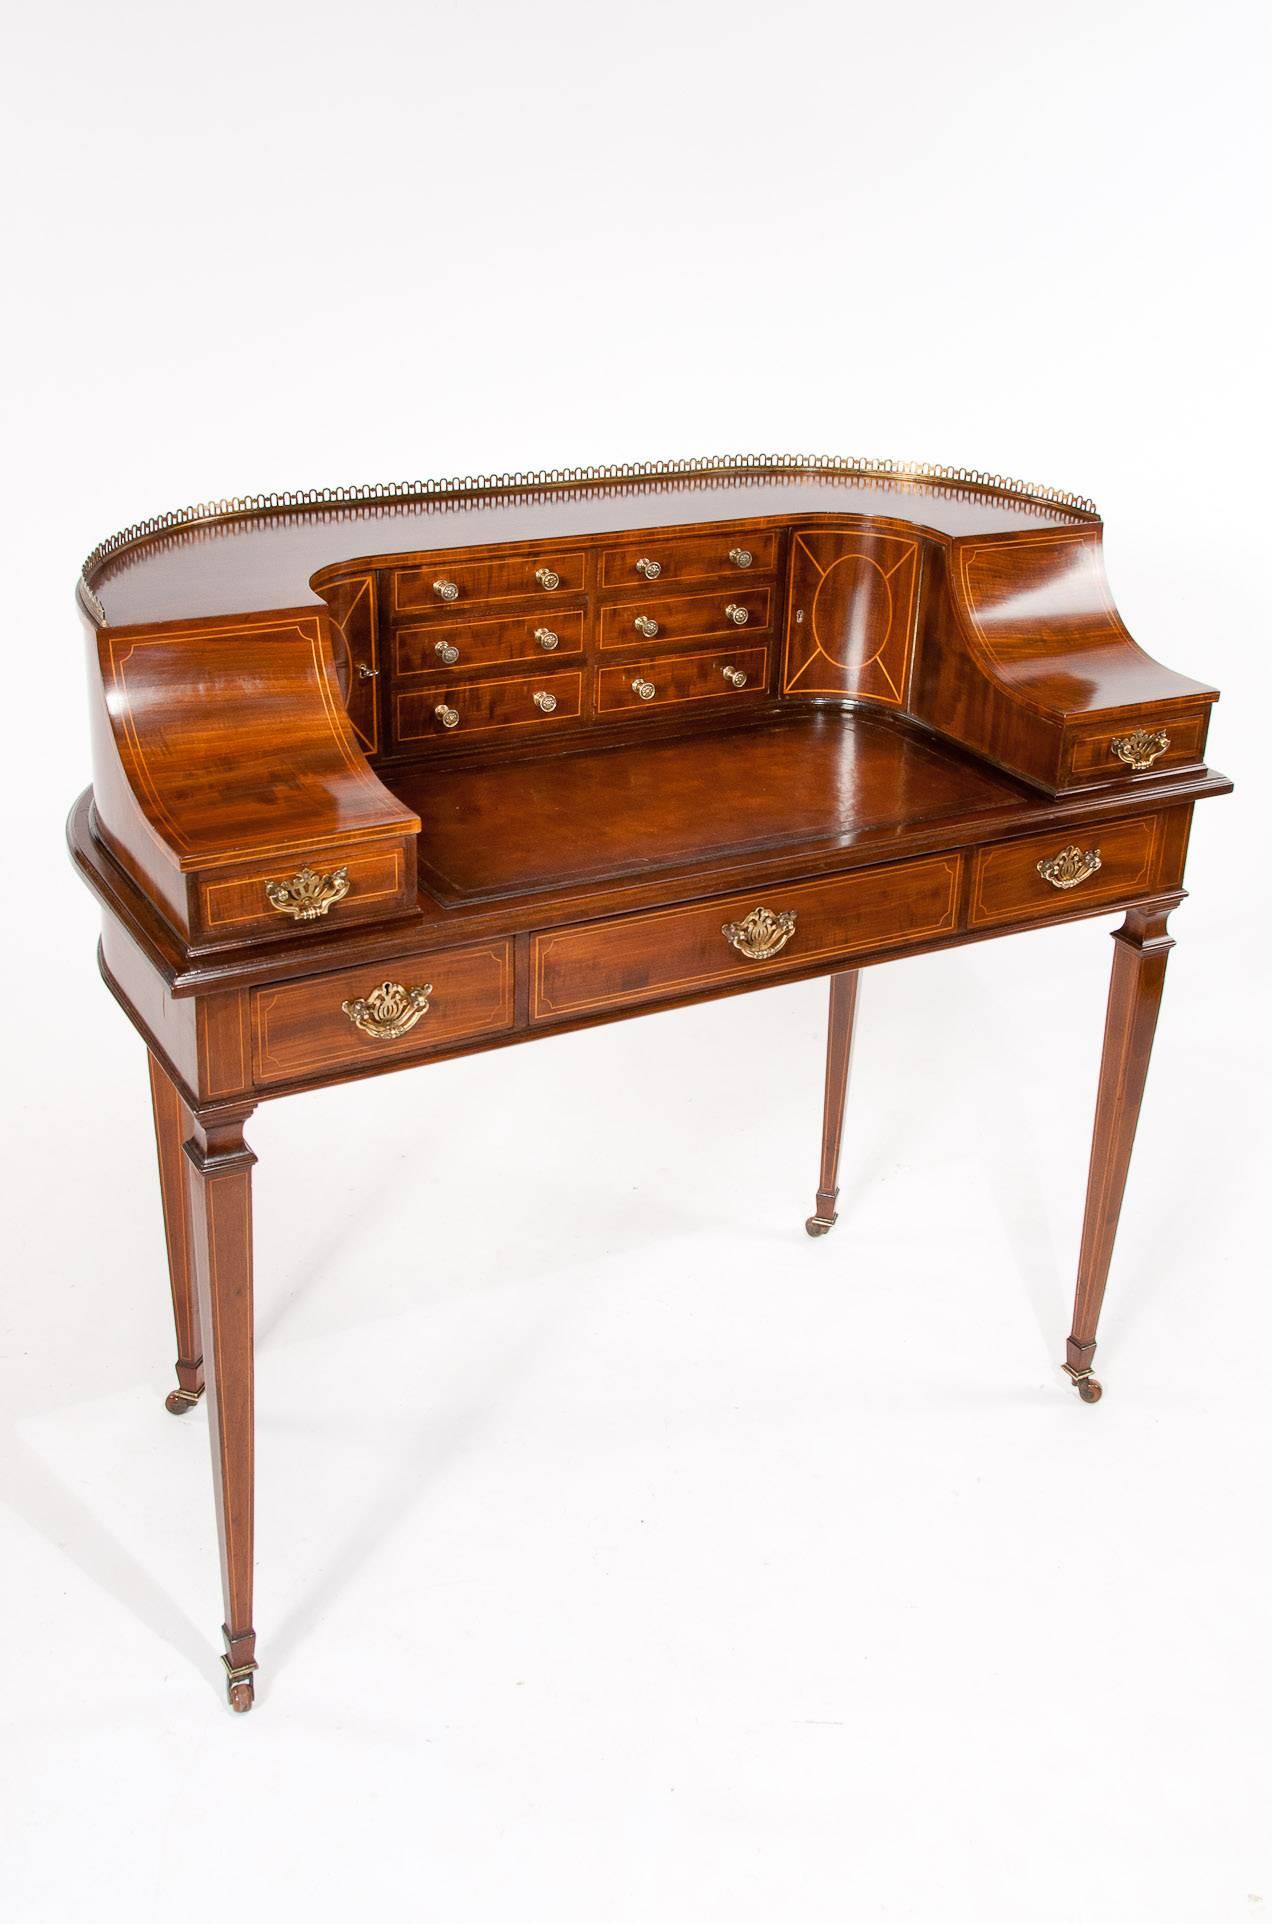 A fine quality late 19th century mahogany Carlton House desk having a extremely good choice of mahogany used, often referred to as fiddleback mahogany. 

The brass gallery shaped back having an arrangement of drawers in the centre with a pair of